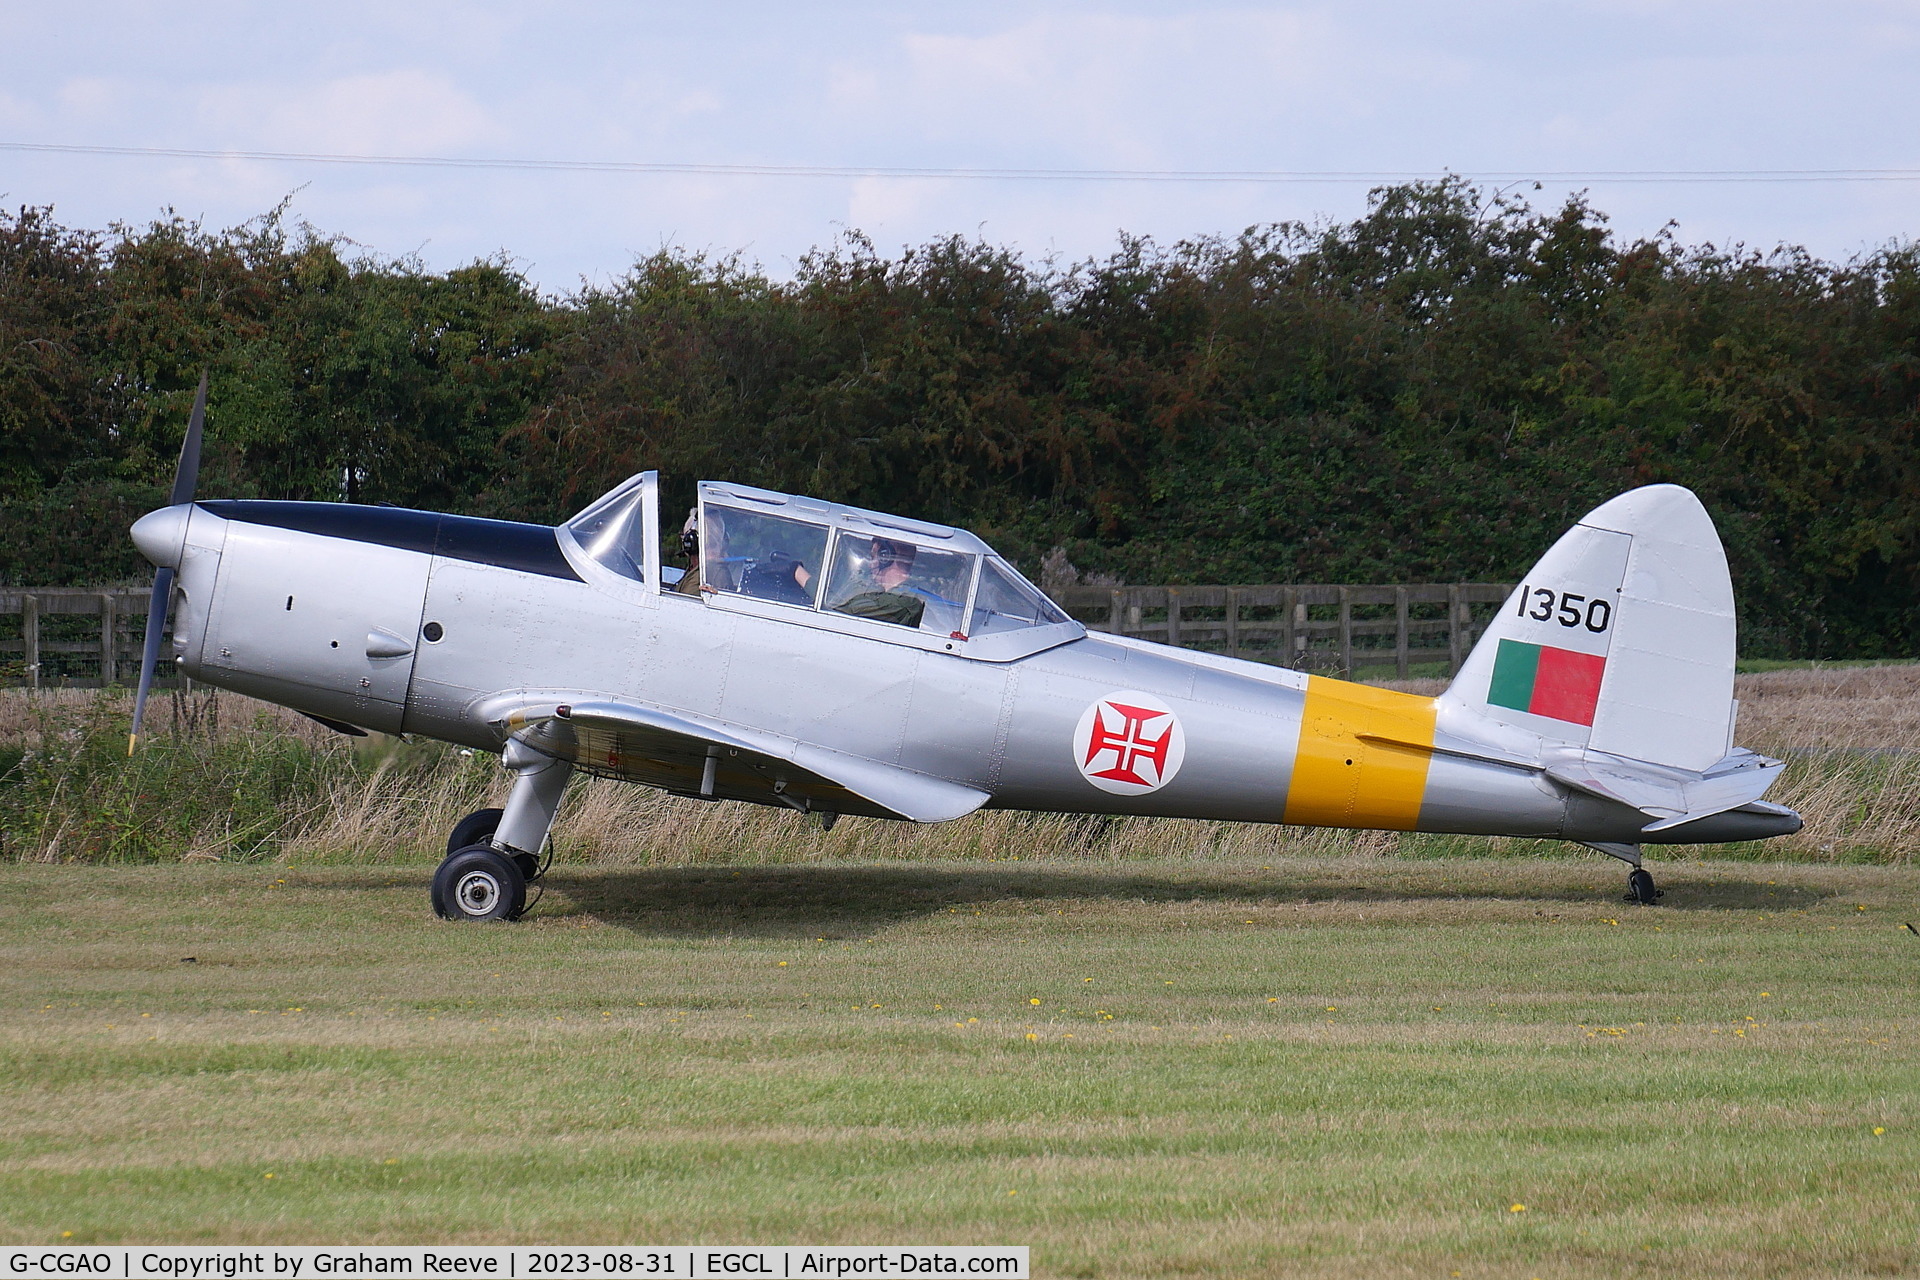 G-CGAO, 1958 OGMA DHC-1 Chipmunk T.20 C/N OGMA-40, About to depart from Fenland.